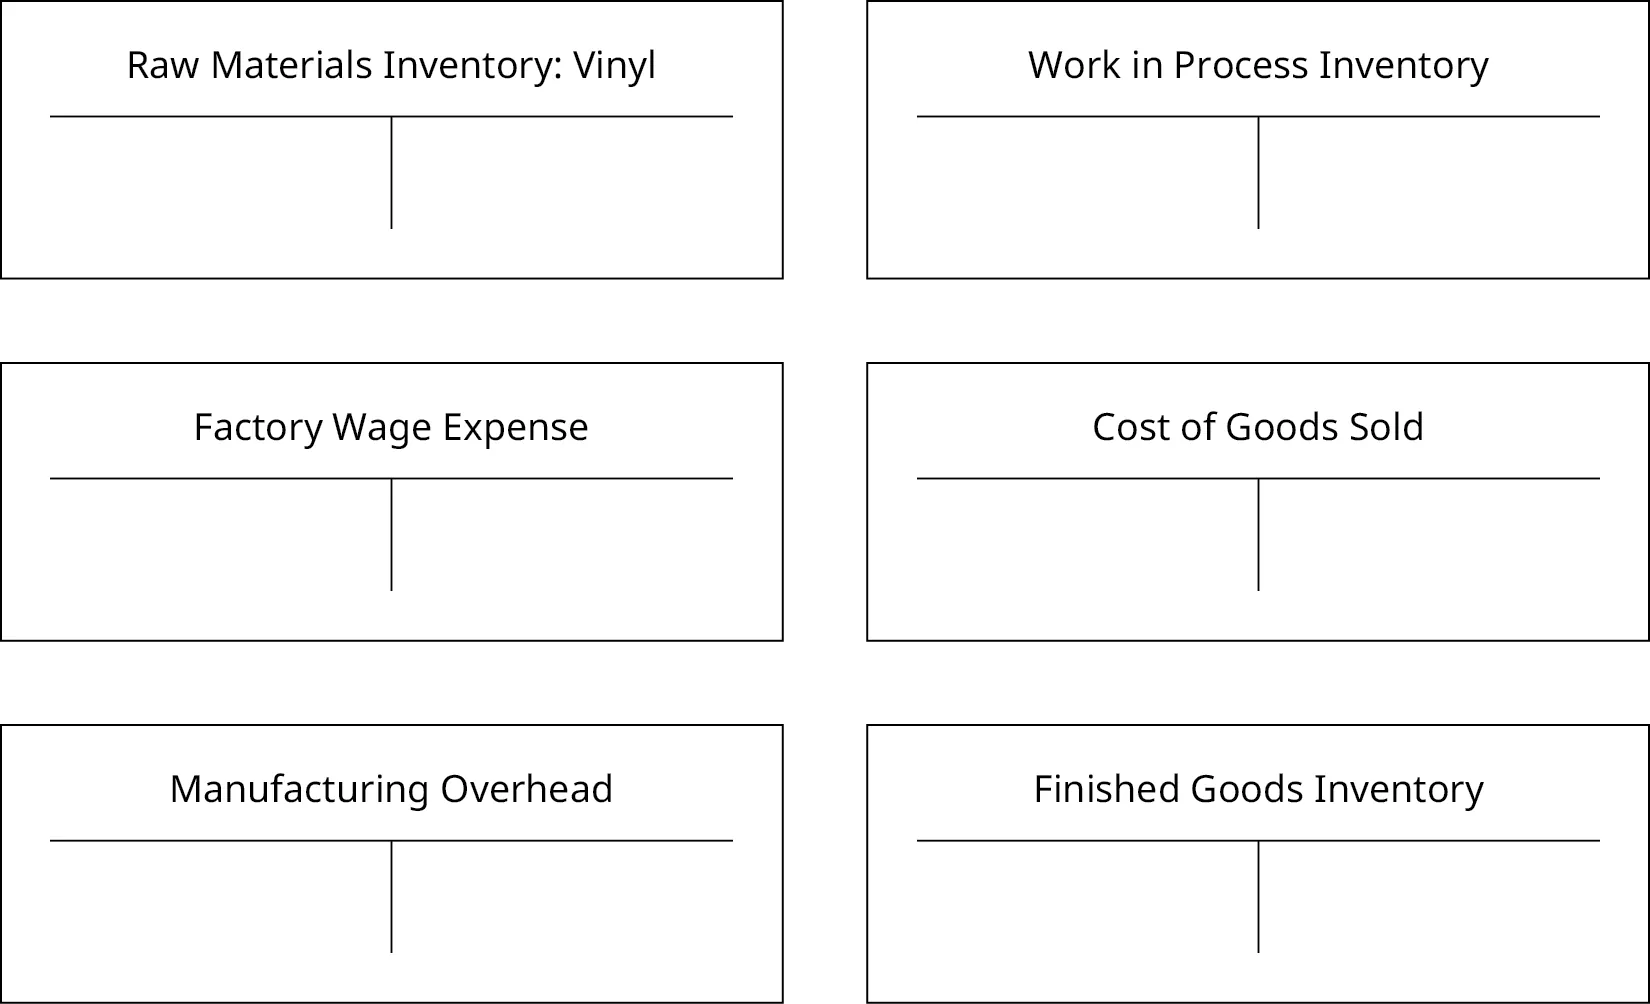 There are six blank T-Accounts in this figure: one each for “Raw Materials Inventory: Vinyl”, “Factory Wage Expense”, “Manufacturing Overhead”, “Work in Process Inventory”, “Cost of Goods Sold”, and “Finished Goods Inventory.”